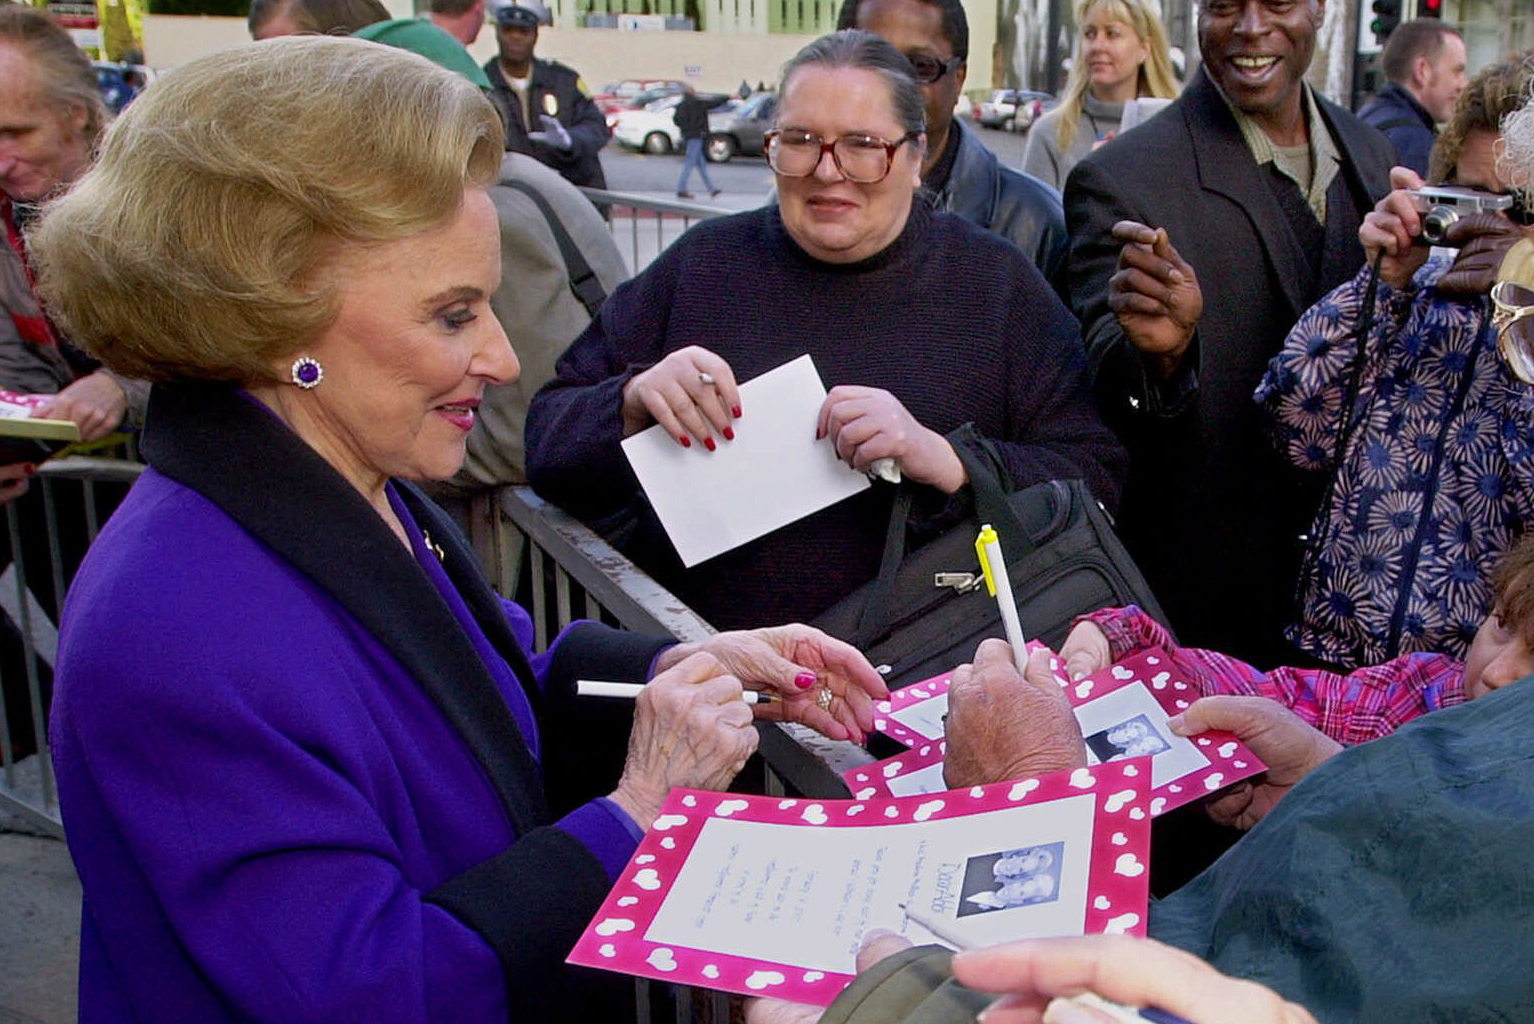 &quot;Dear Abby&quot; advice columnist Pauline Friedman Phillips, known to millions of readers as Abigail van Buren, signs autographs for fans after the dedication of a &quot;Dear Abby&quot; star on the Hollywood Walk of Fame in Los Angeles in February 2001. Phillips, who had Alzheimeris disease, died Wednesday.